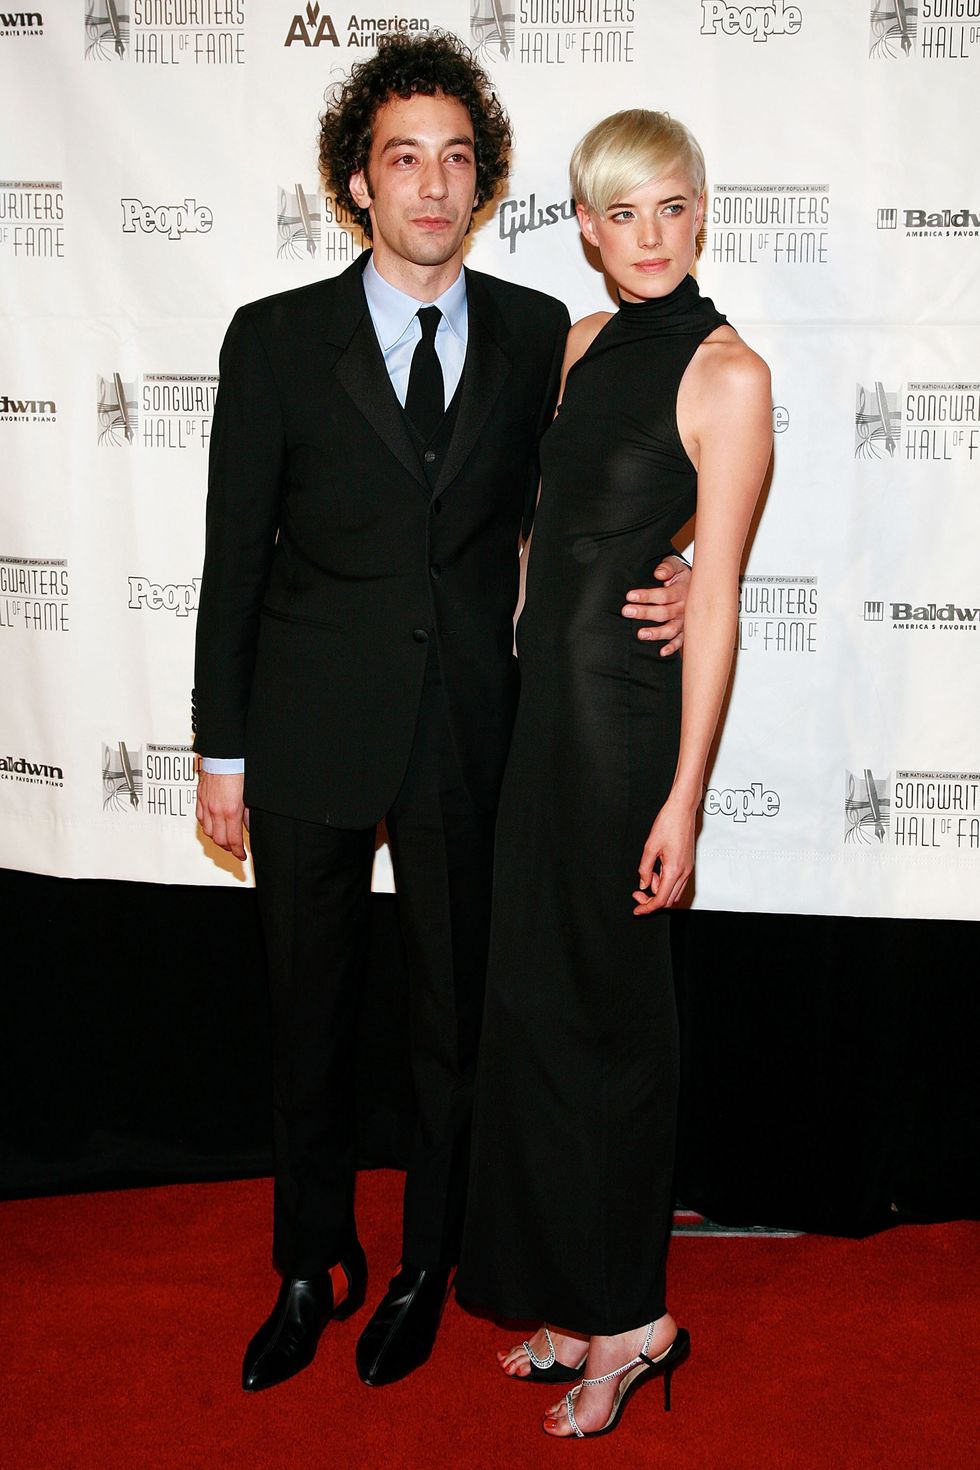 NEW YORK - JUNE 19:  Musician Albert Hammond Jr. and model Agyness Deyn arrives at the 39th Annual Songwriters Hall of Fame Induction Ceremony on June 19, 2008 at the Marriott Marquis in New York.  (Photo by Charles Eshelman/FilmMagic)